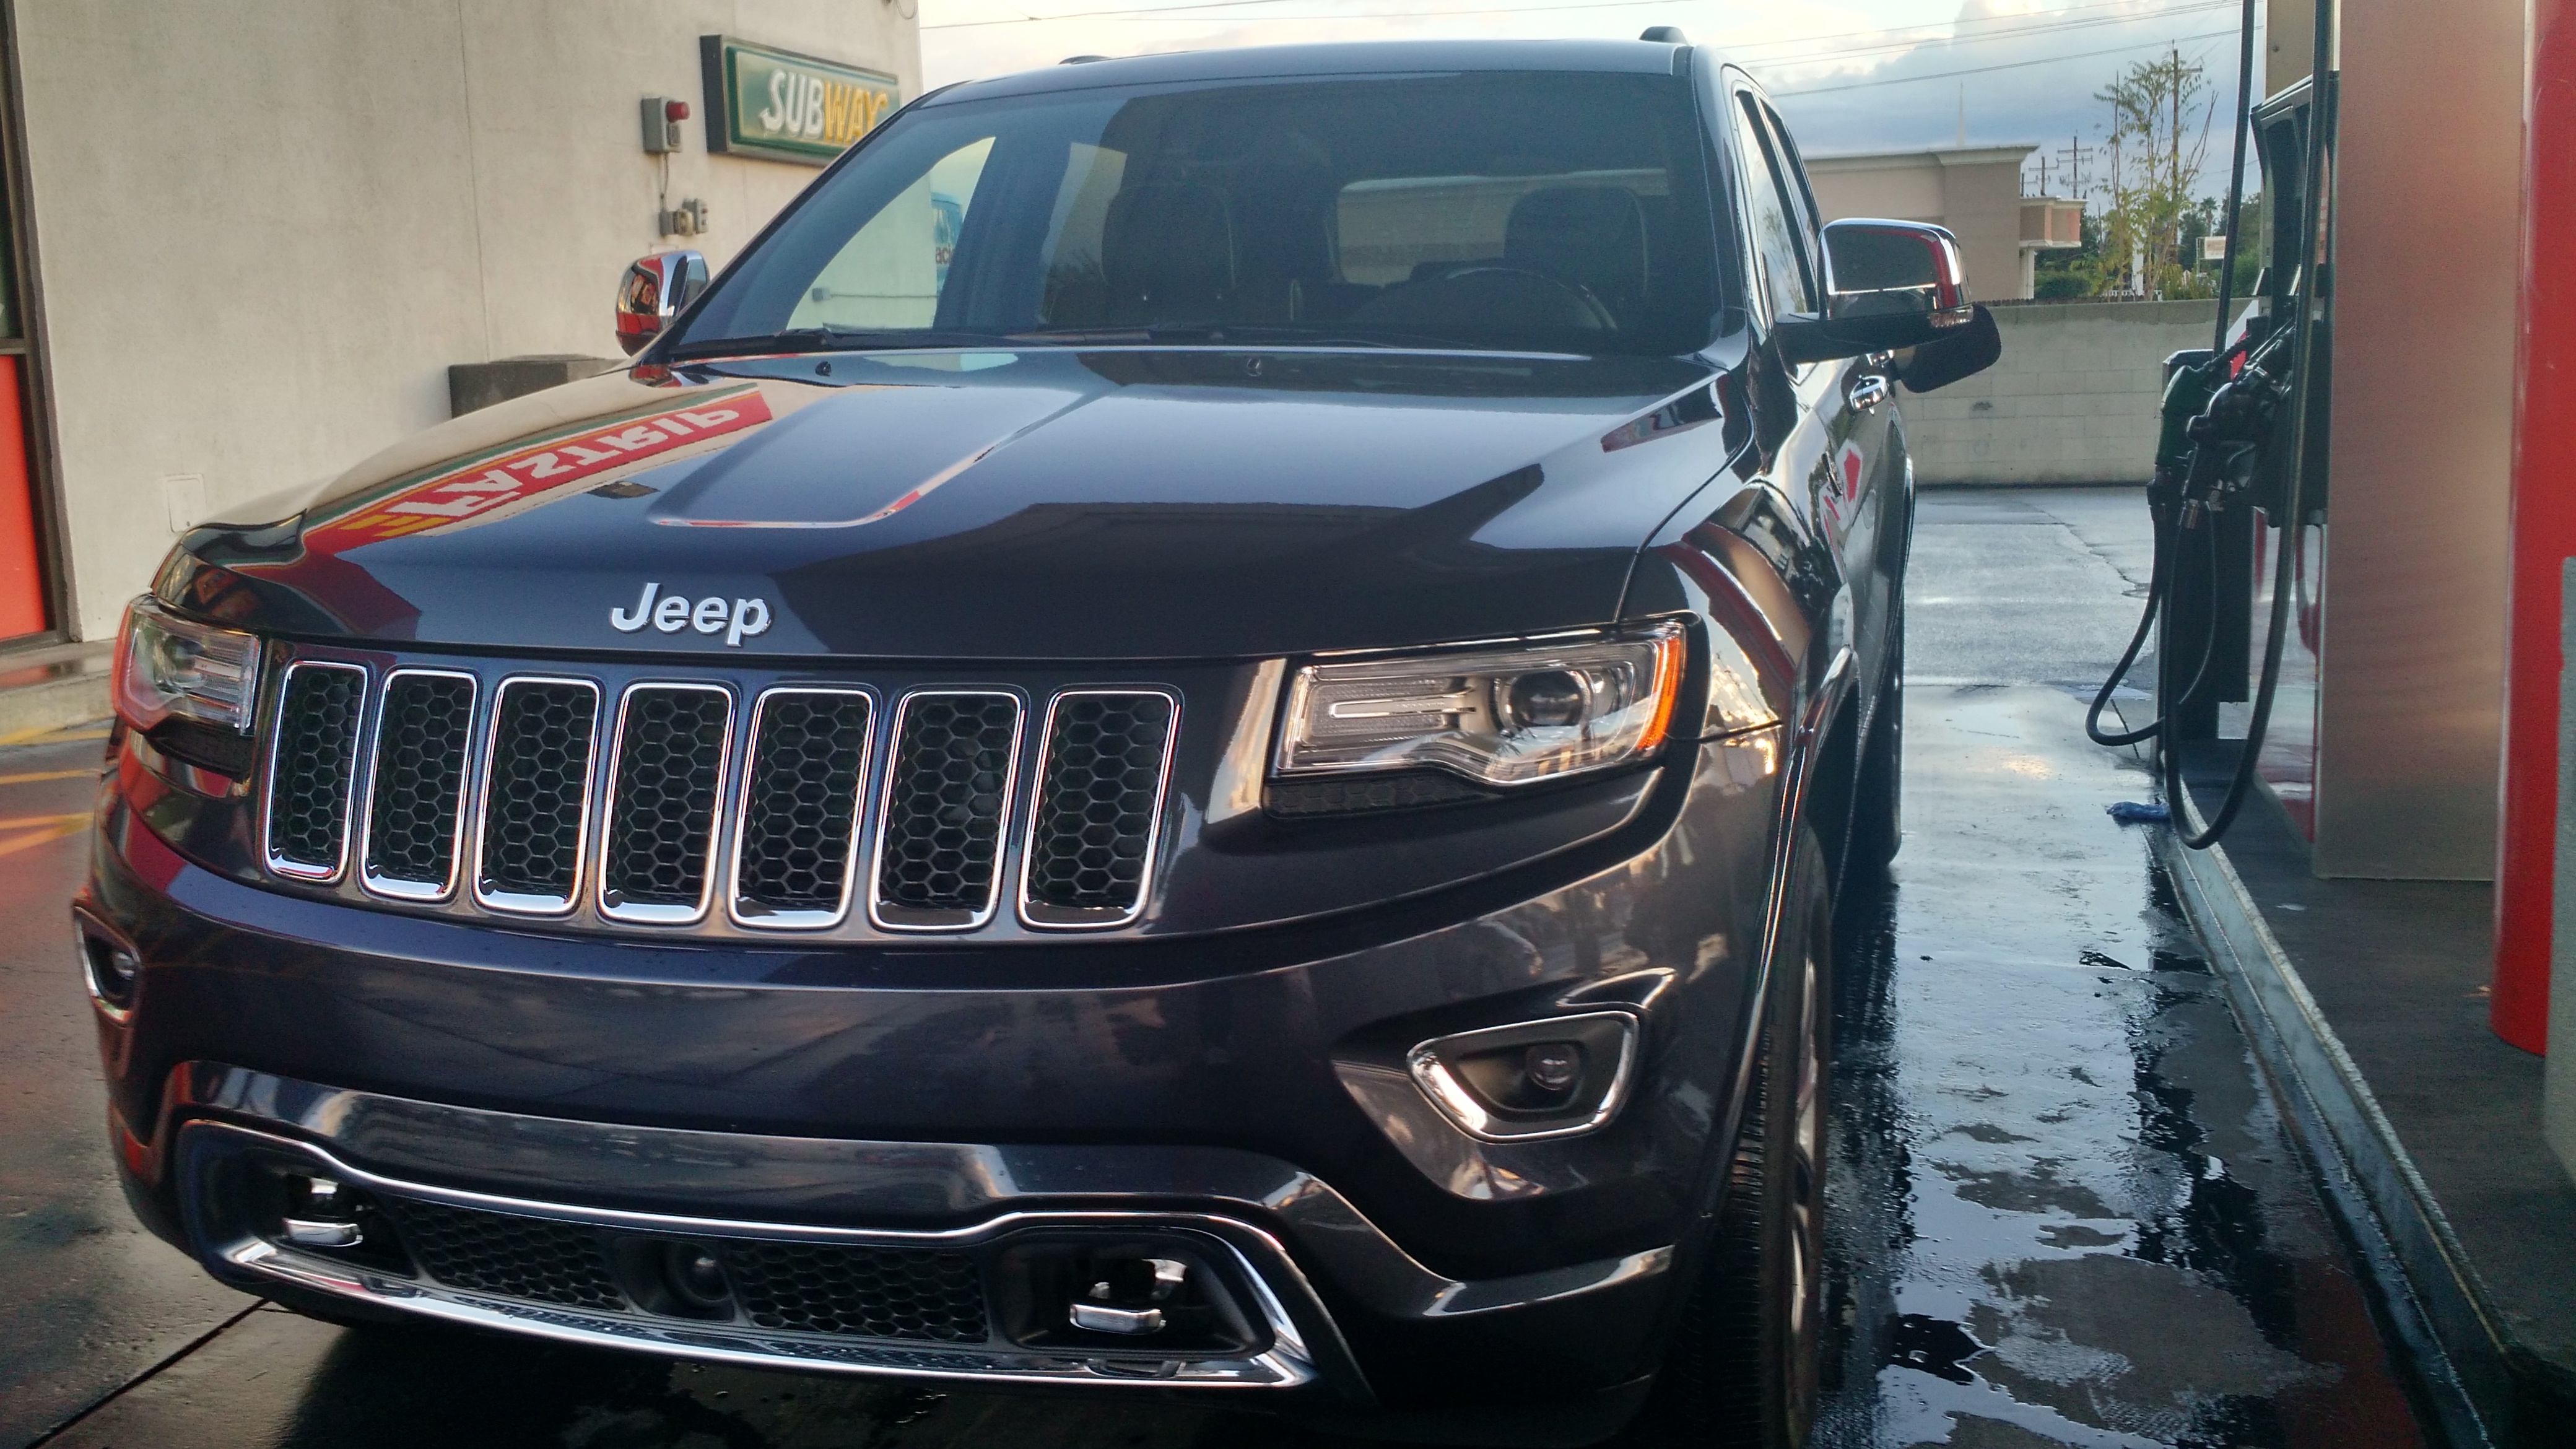 2015 Jeep Grand Cherokee Ecodiesel Review The Ignition Blog